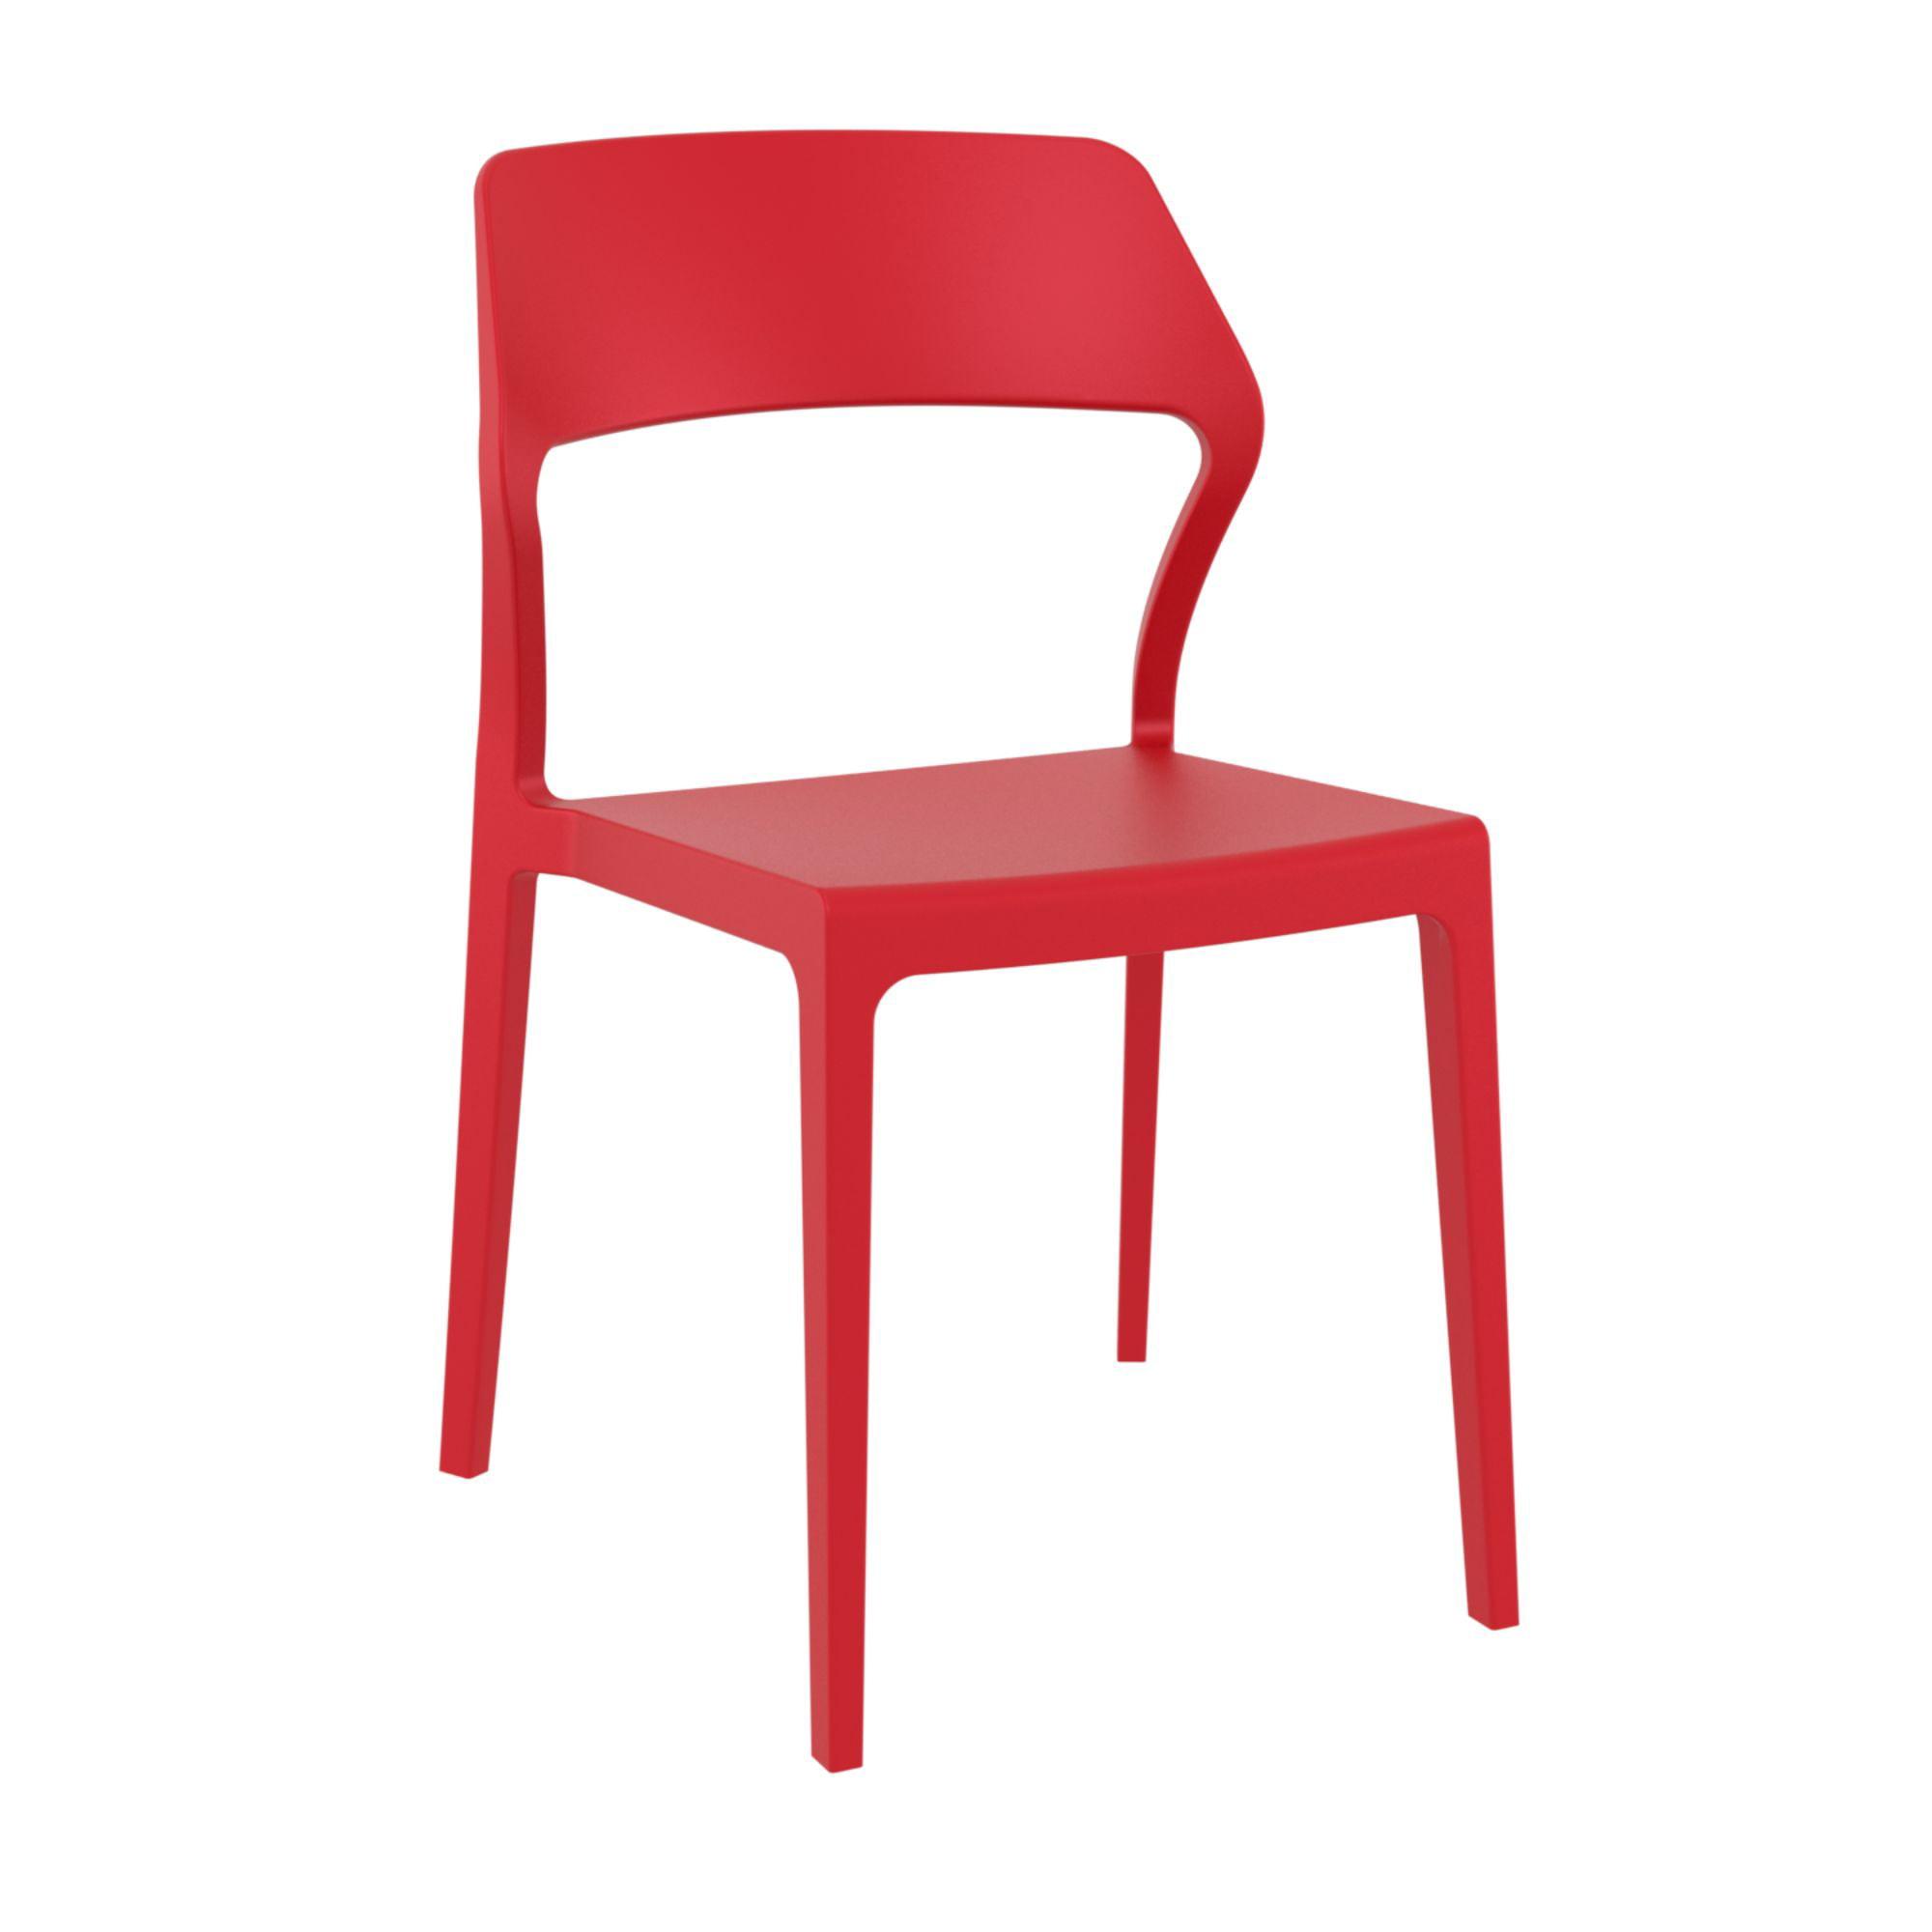 32.75" Radiant Red Resin Indoor/Outdoor Patio Dining Chair